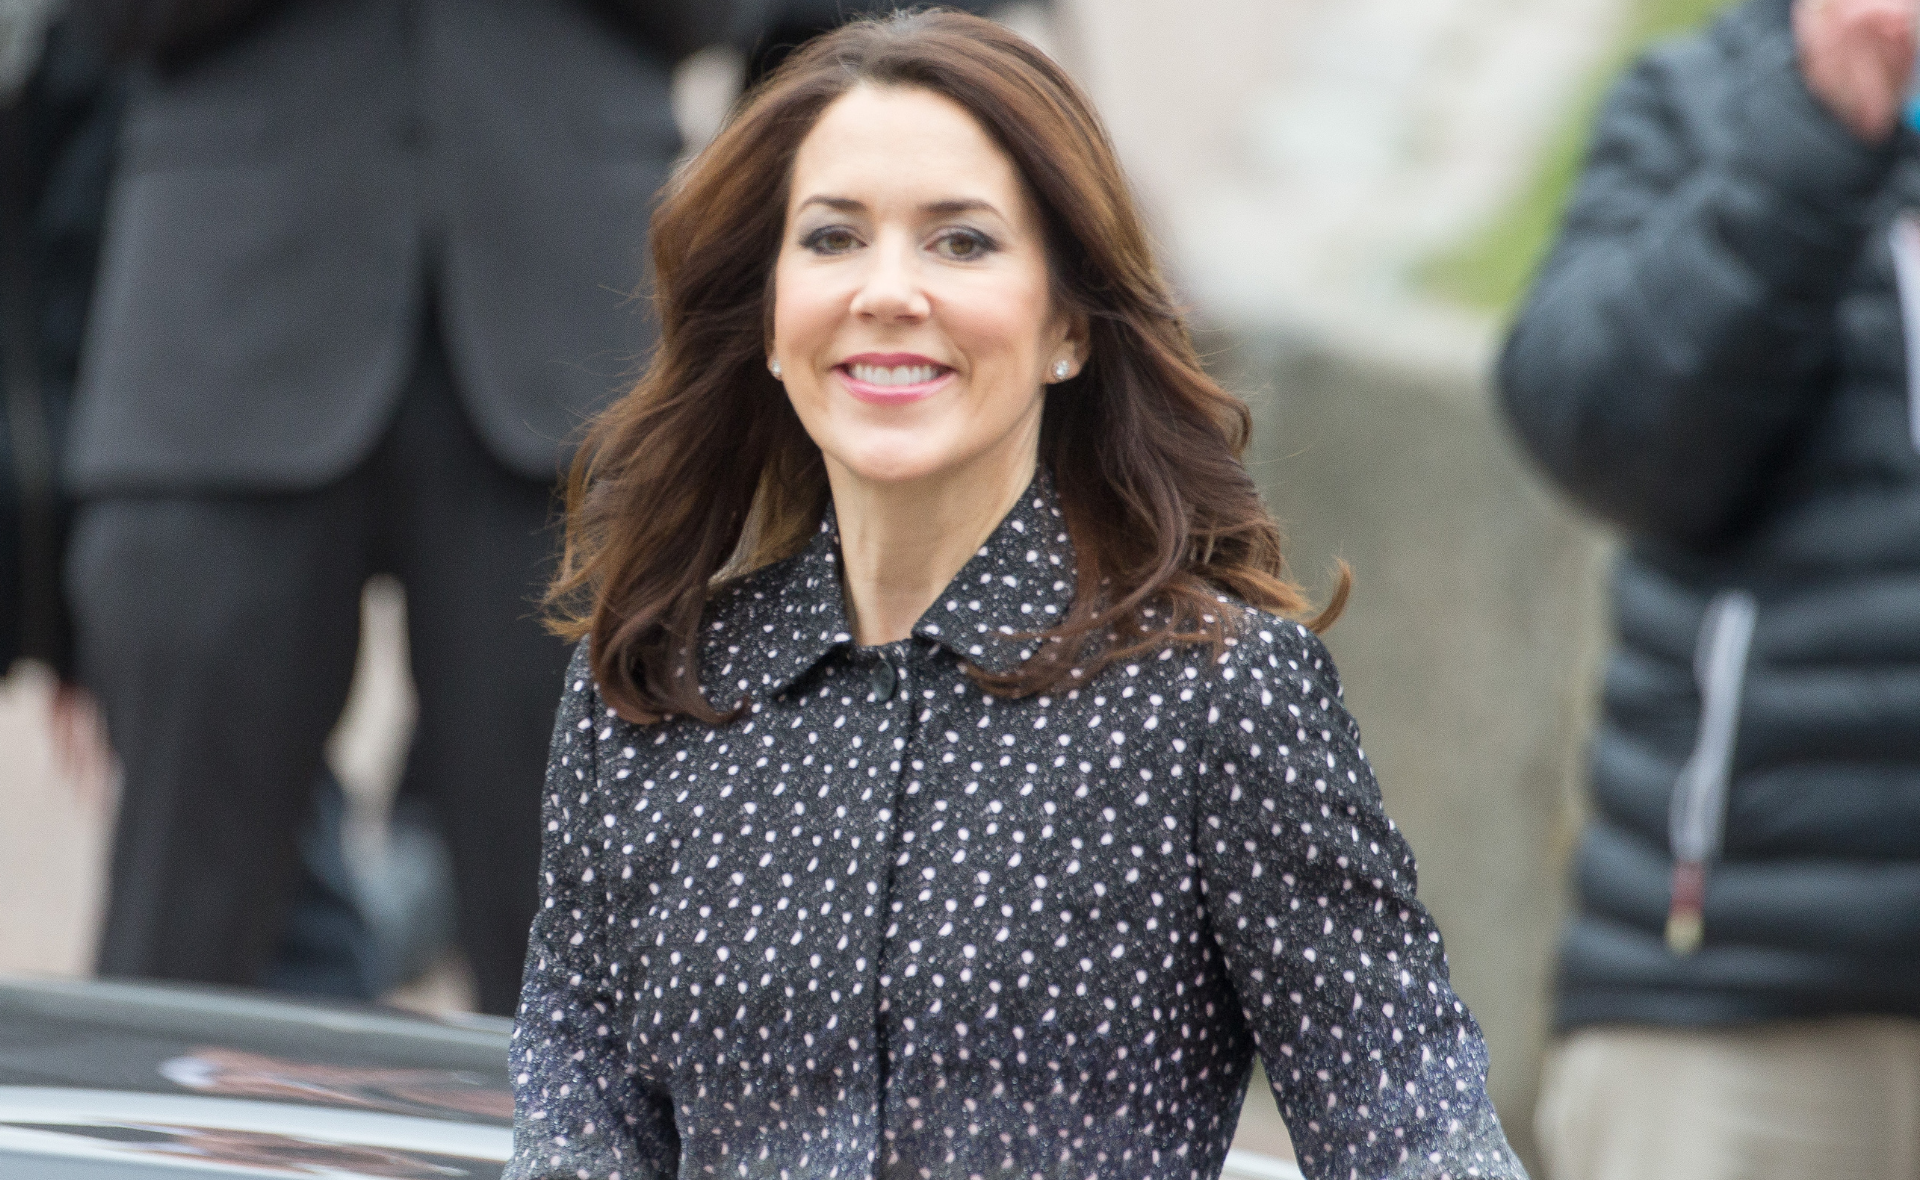 Princess Mary of Denmark reveals which team she supported in the Women’s World Cup